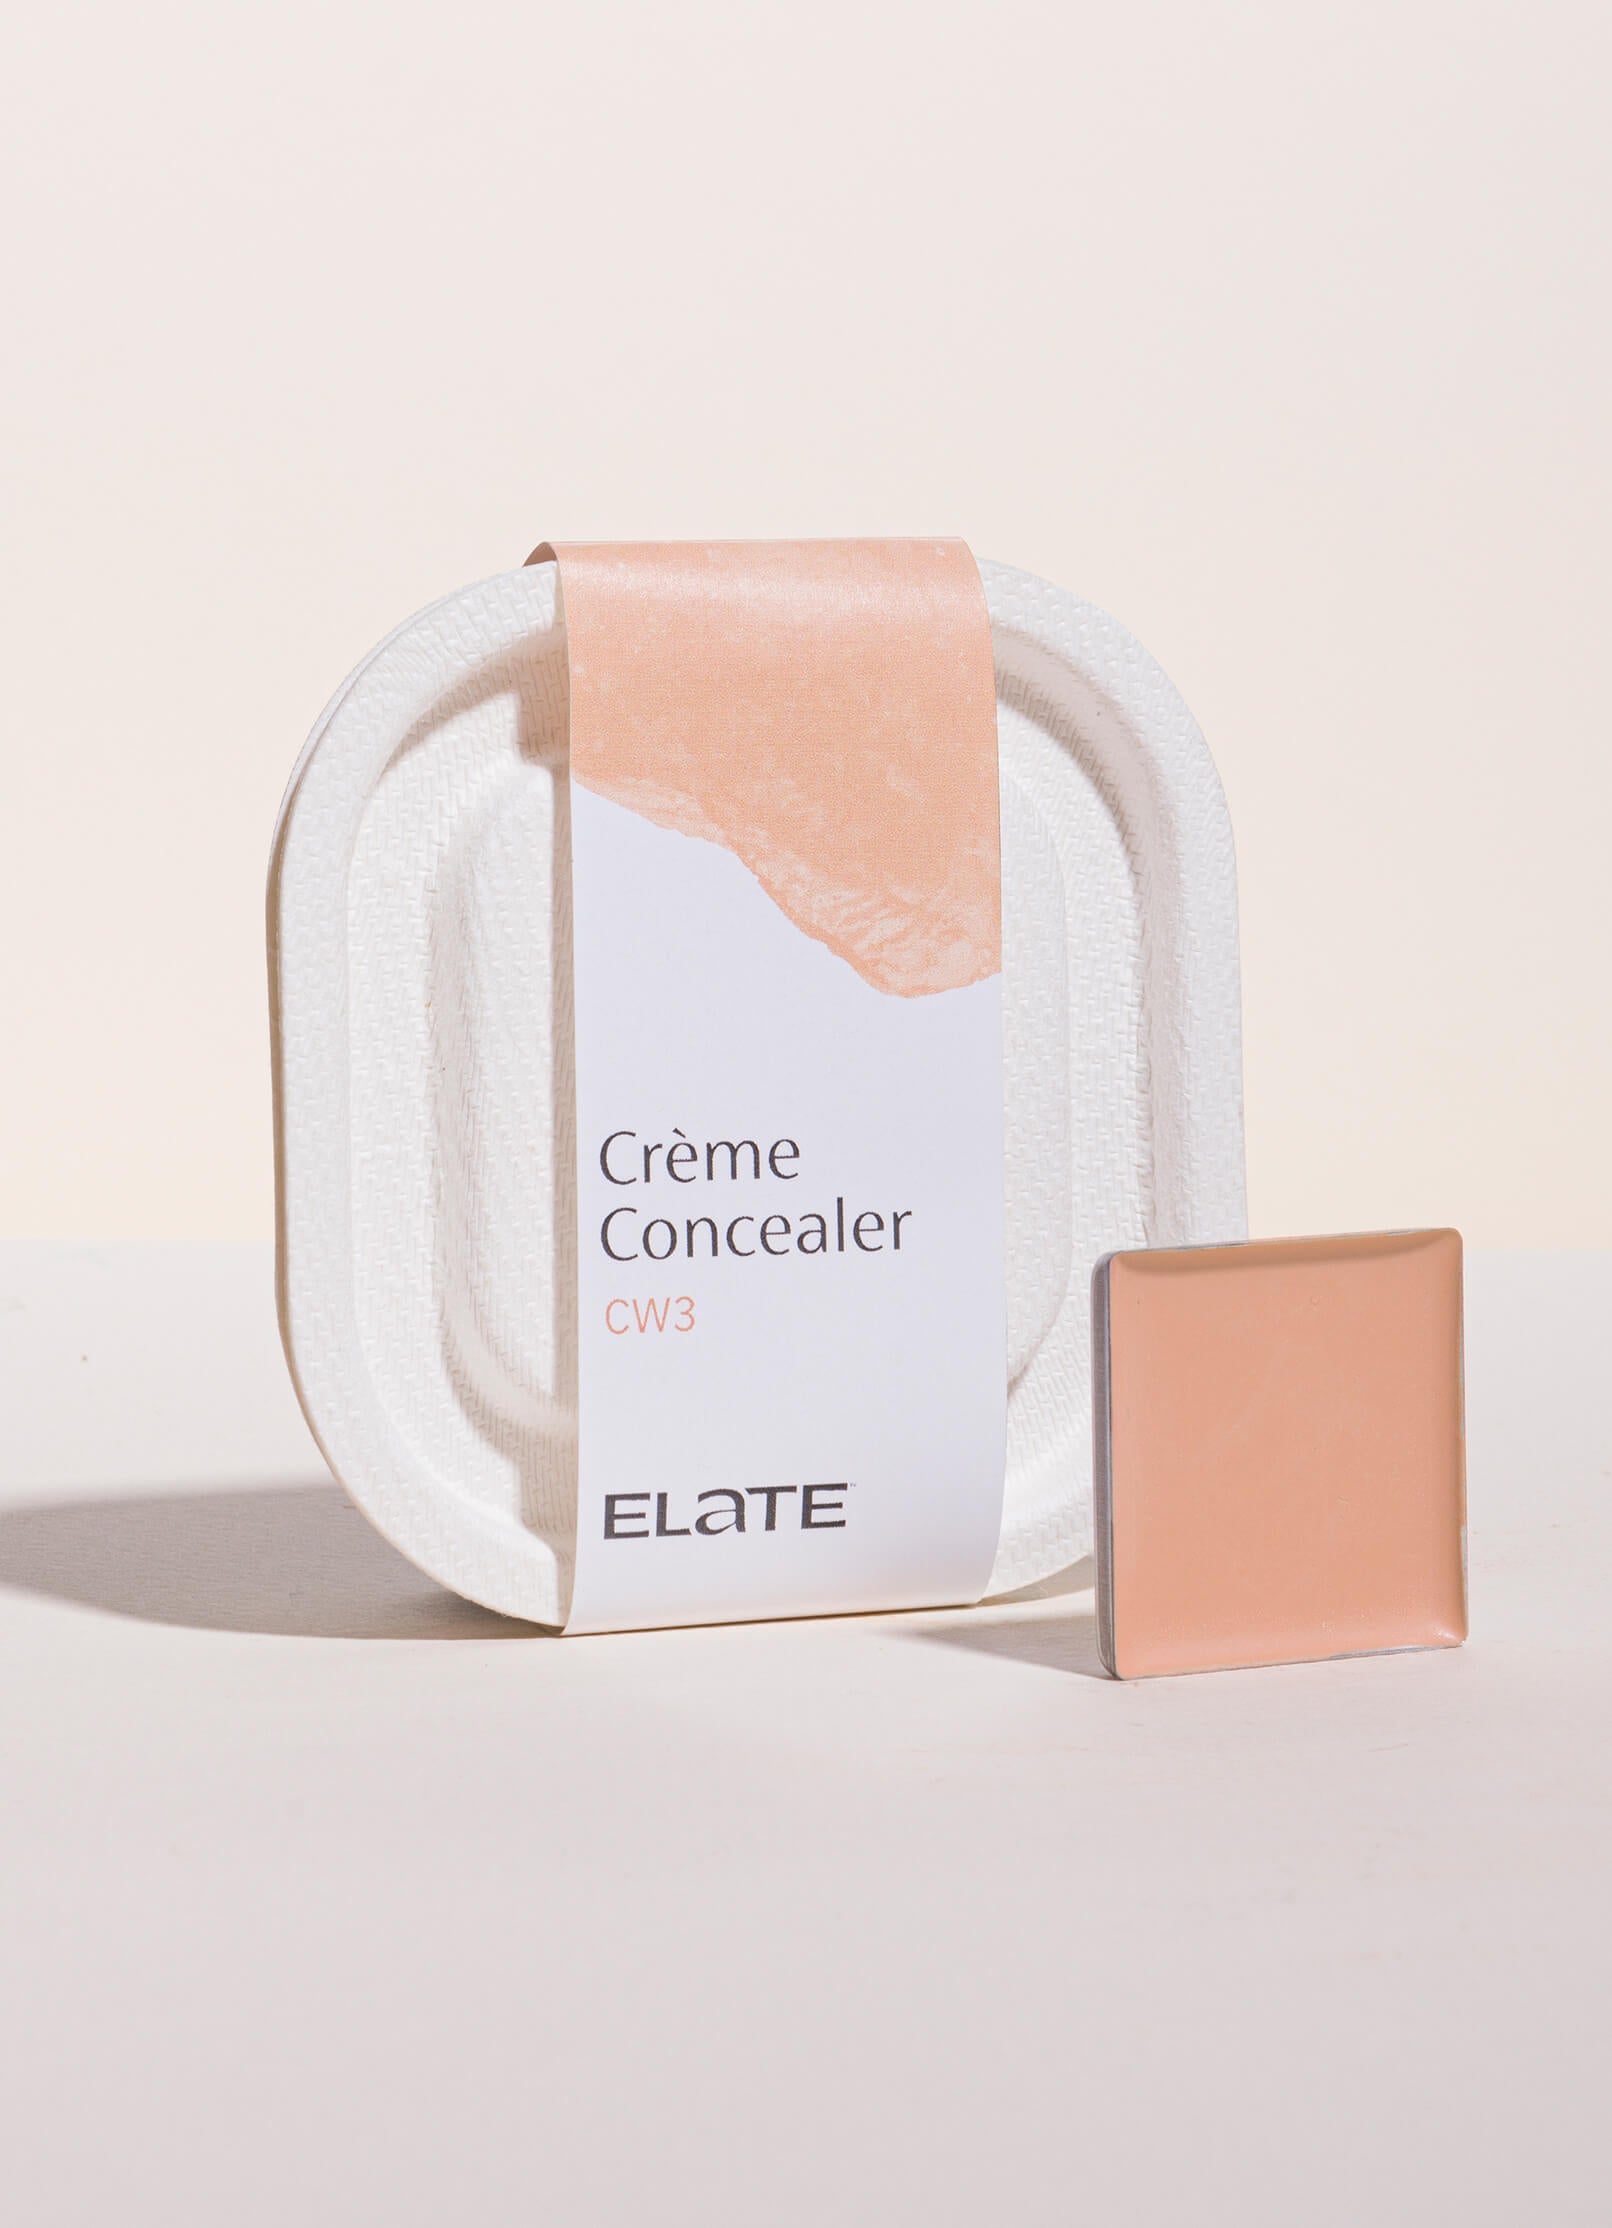 Elate Ethical Marketplace: Sustainably packaged, ethically sourced